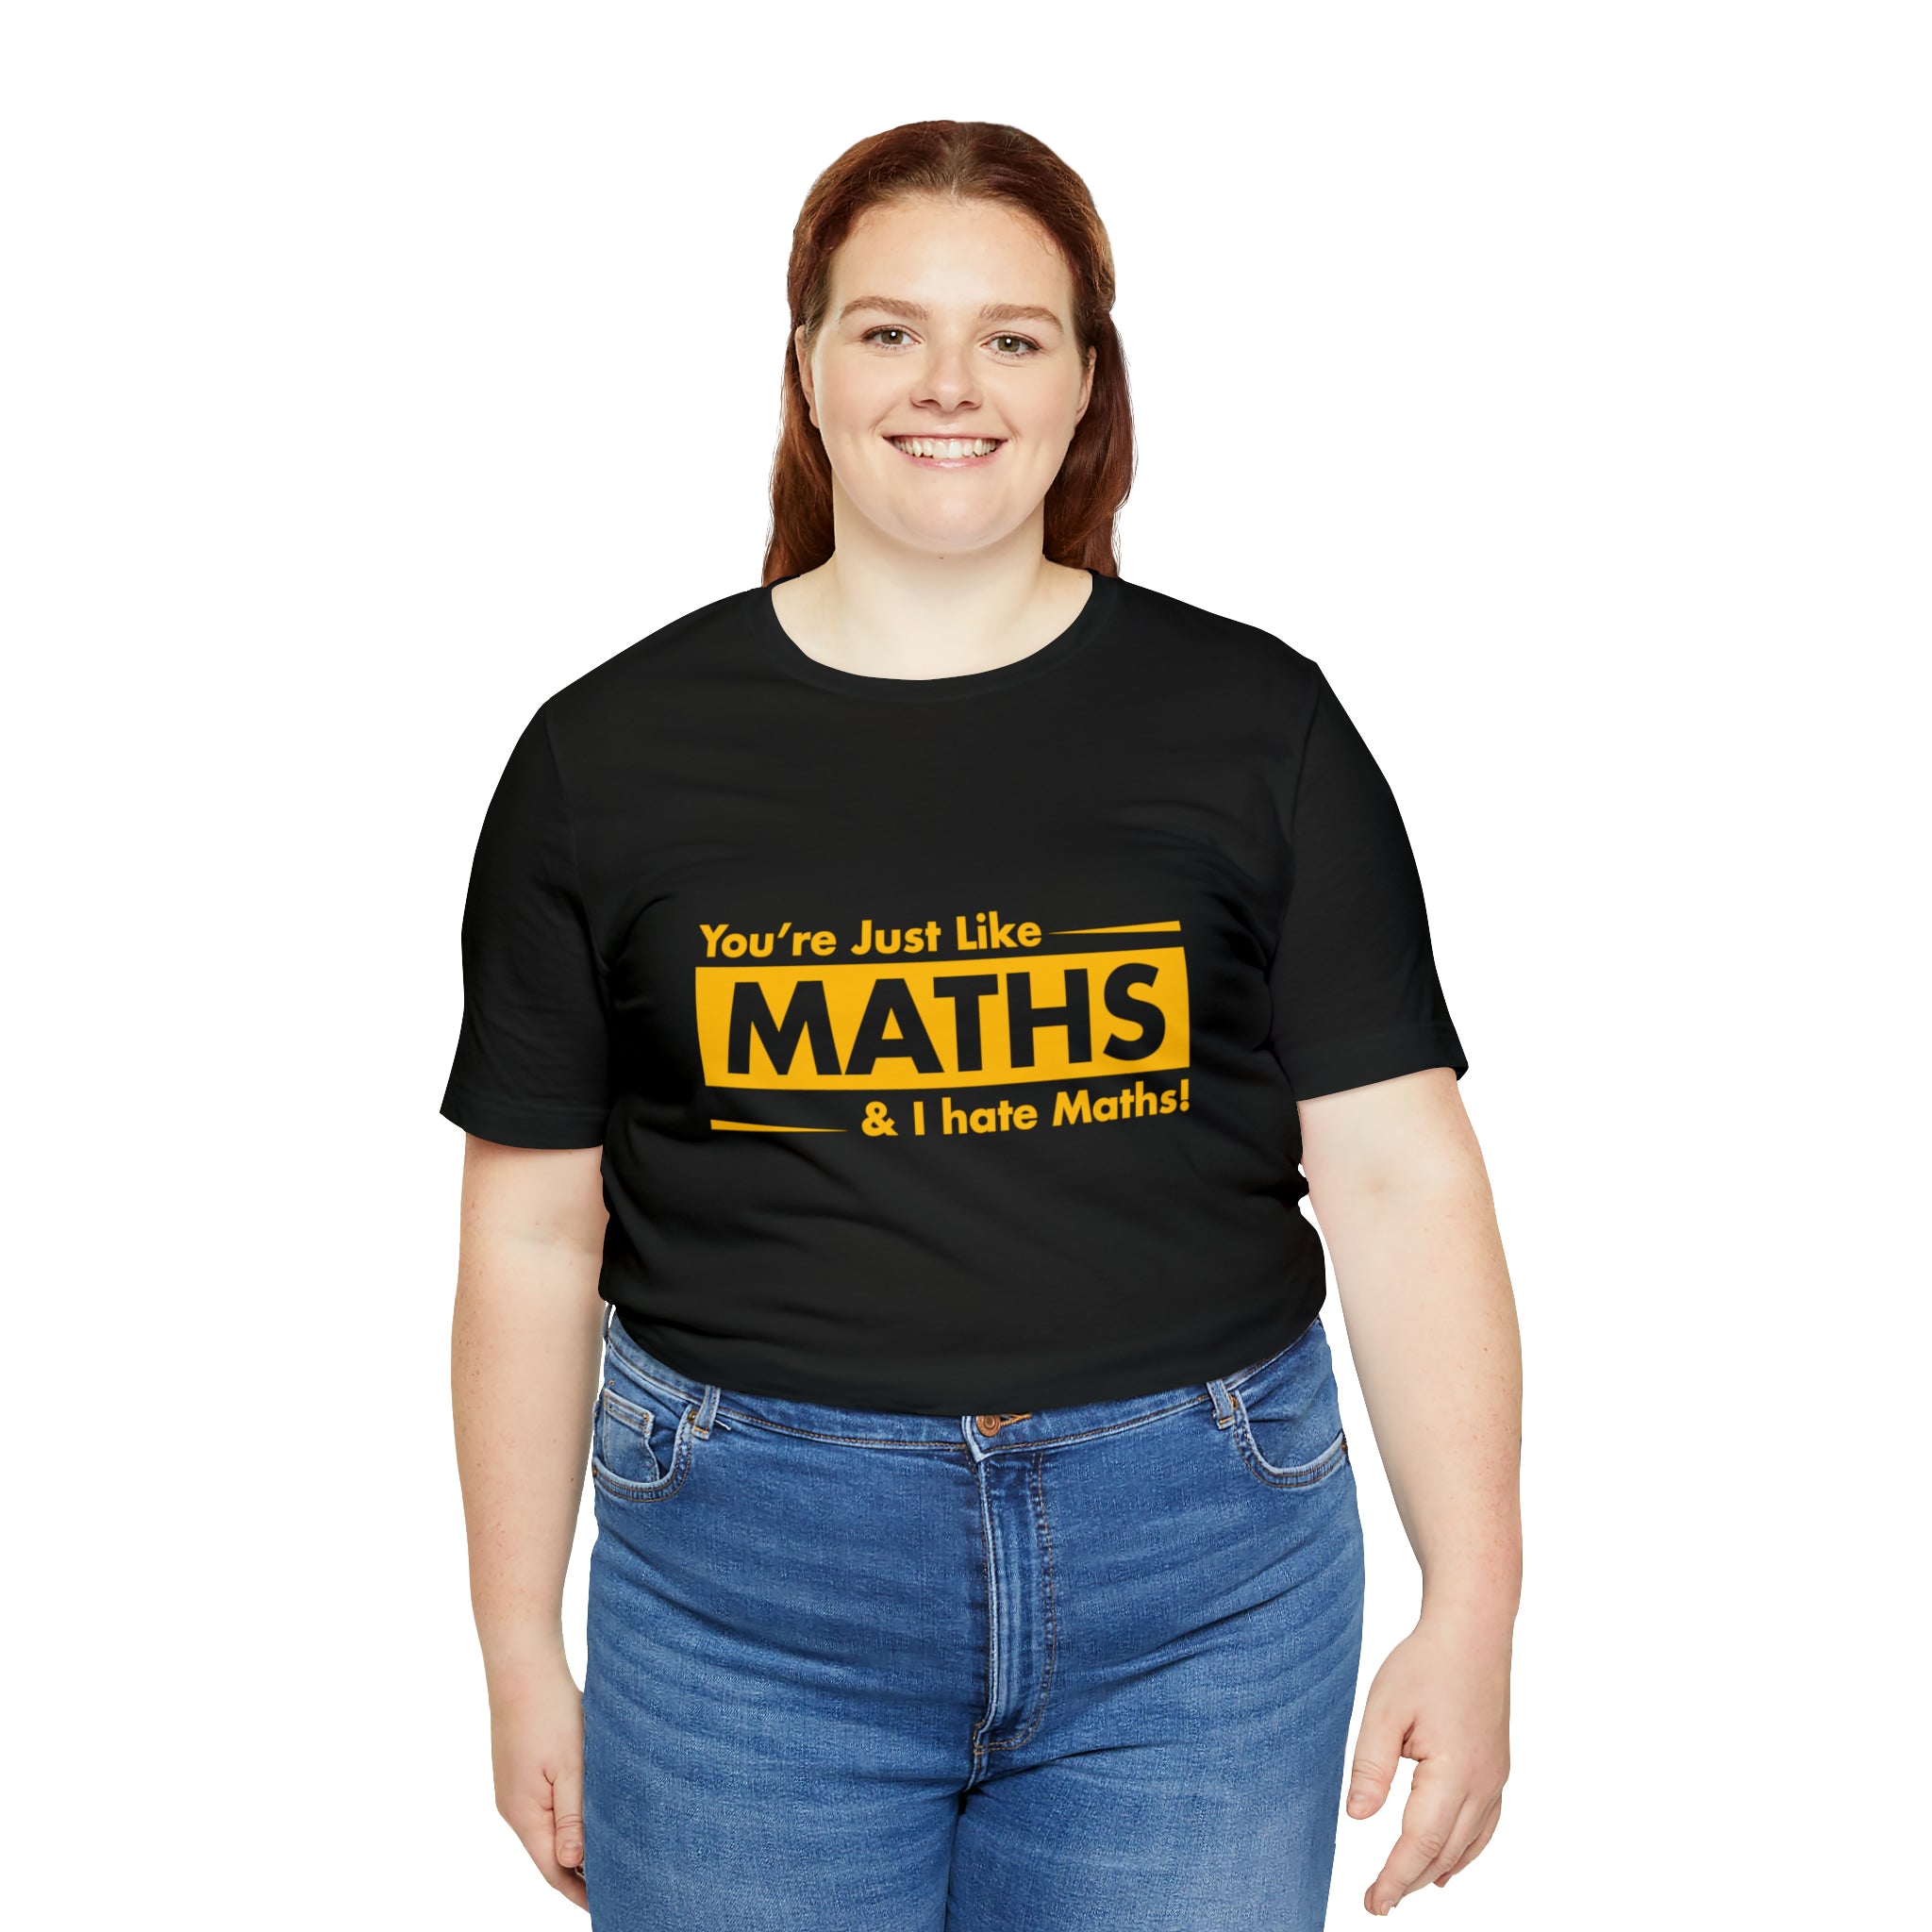 Show off your fashion sense with the "You are just like maths and I hate maths" T-shirt.